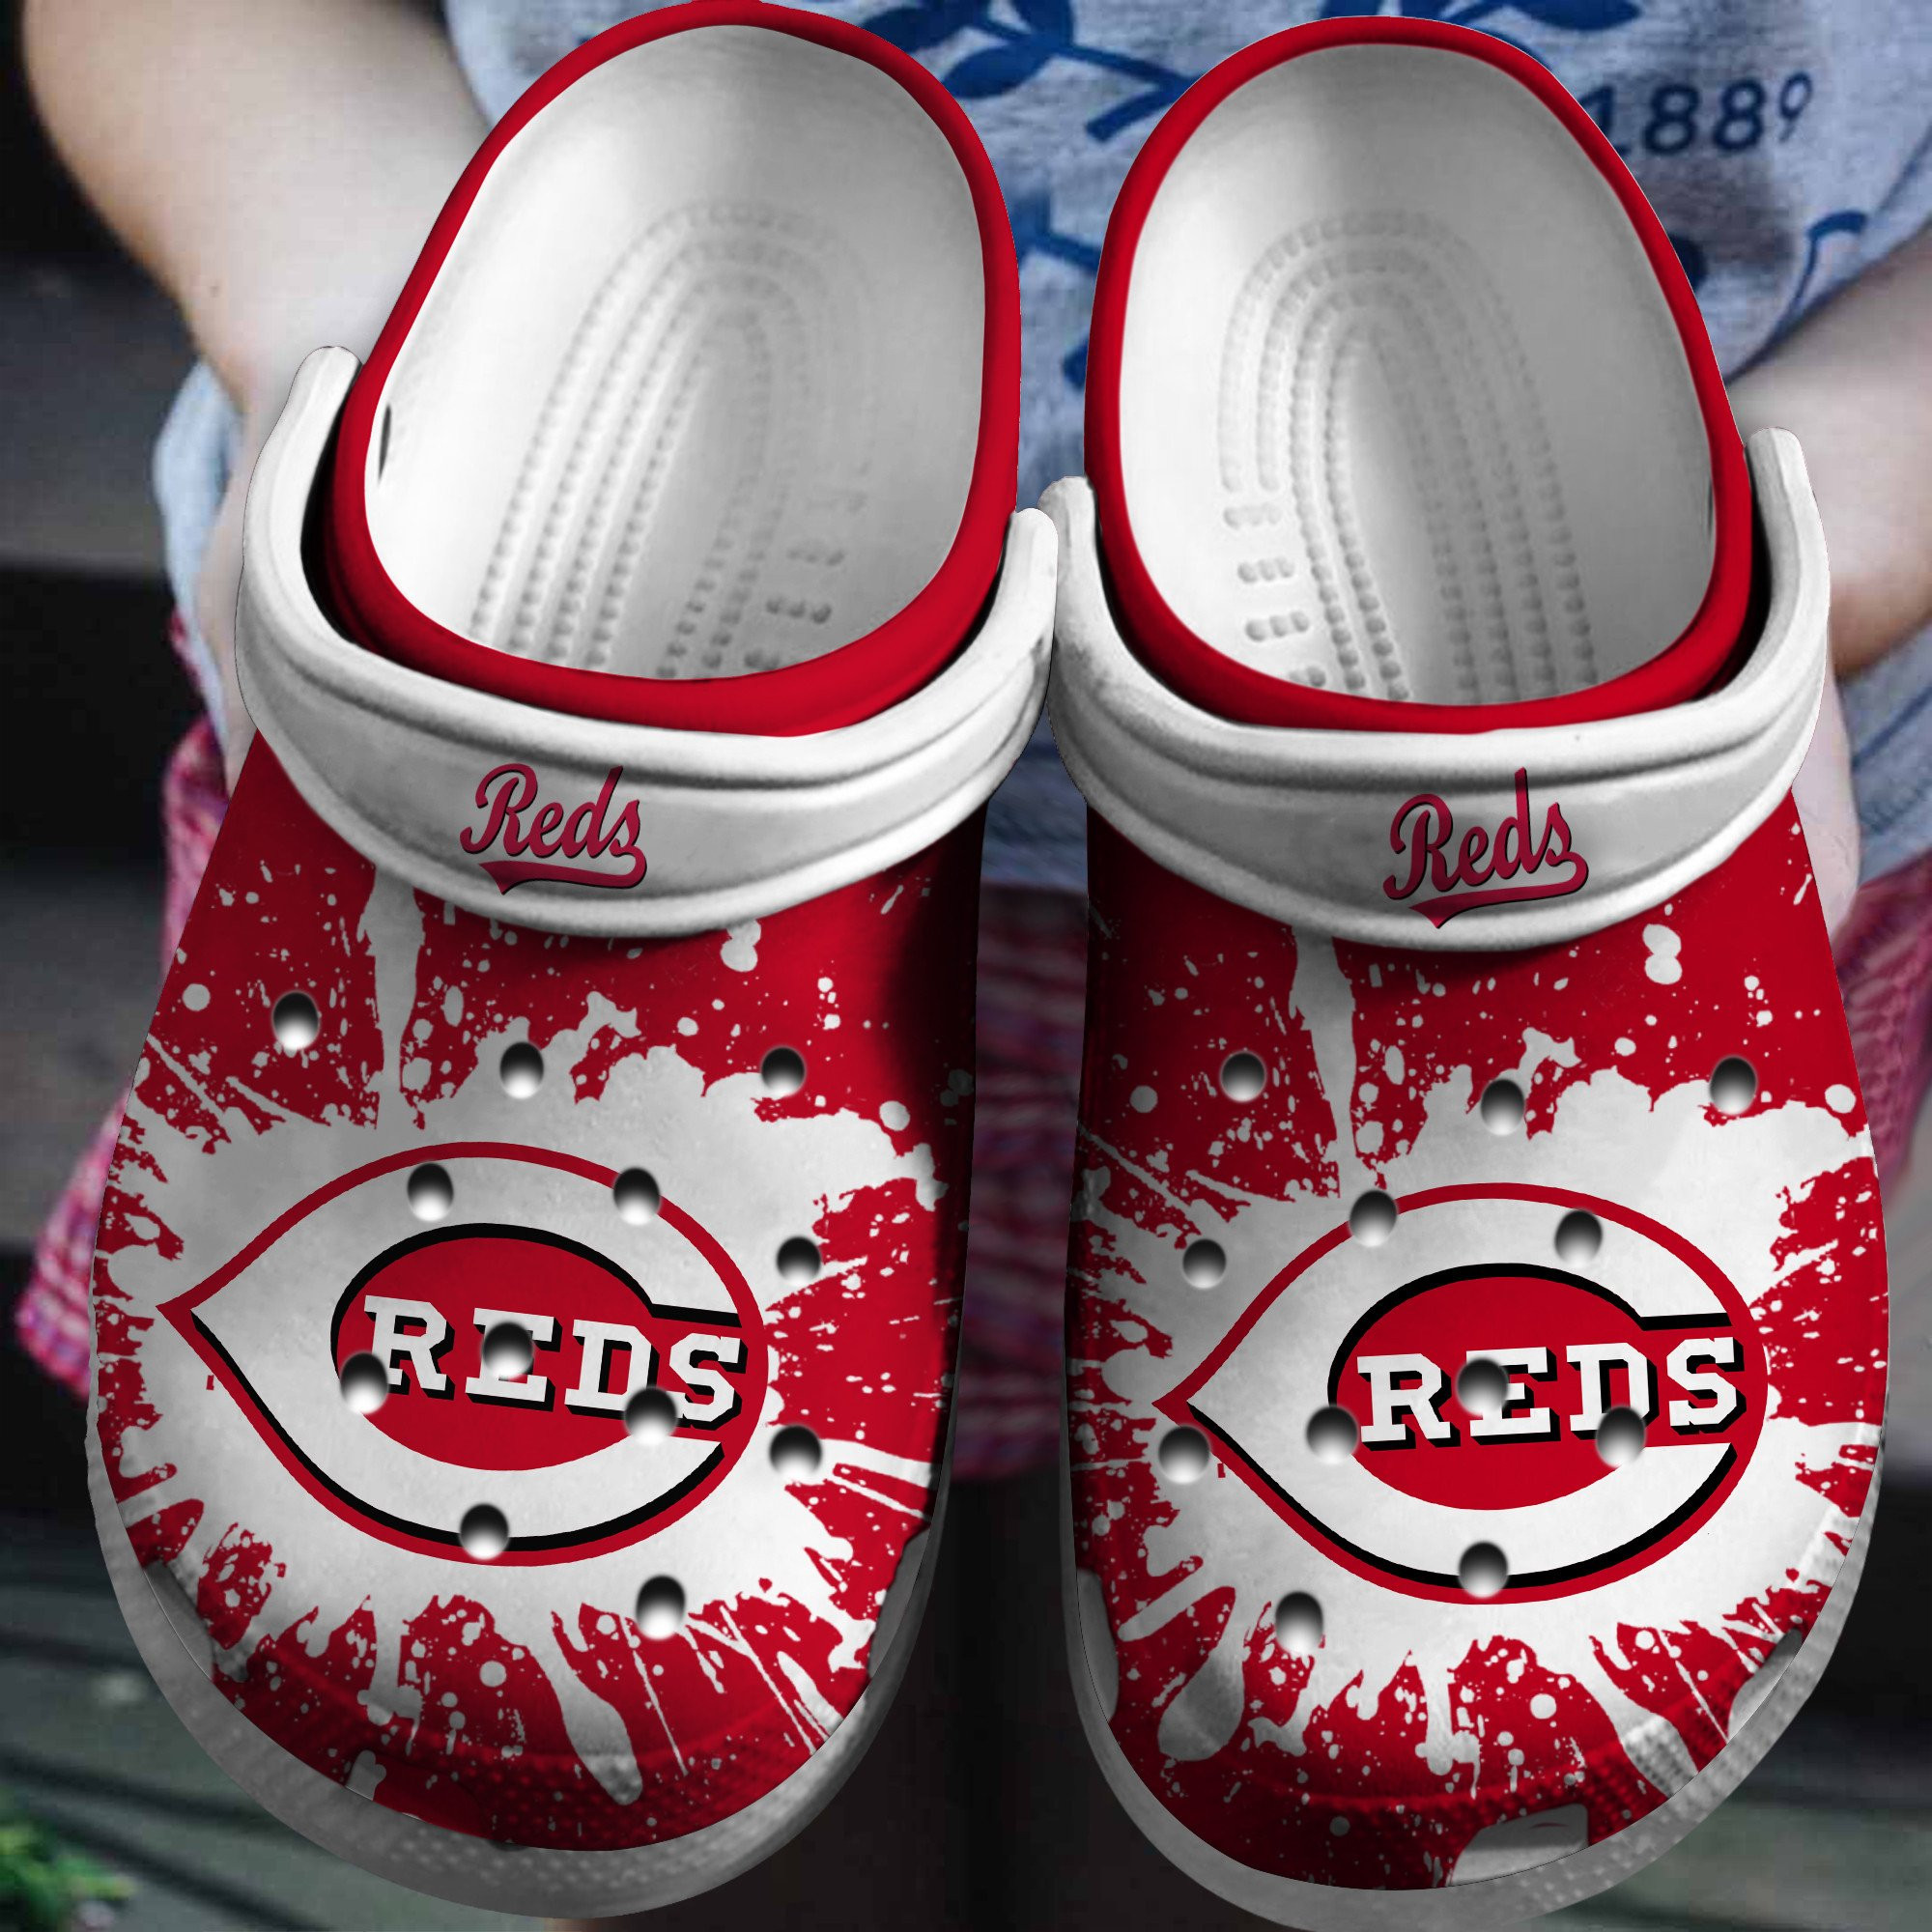 Hot Mlb Team Cincinnati Reds Red-White Crocs Clog Shoesshoes Trusted Shopping Online In The World